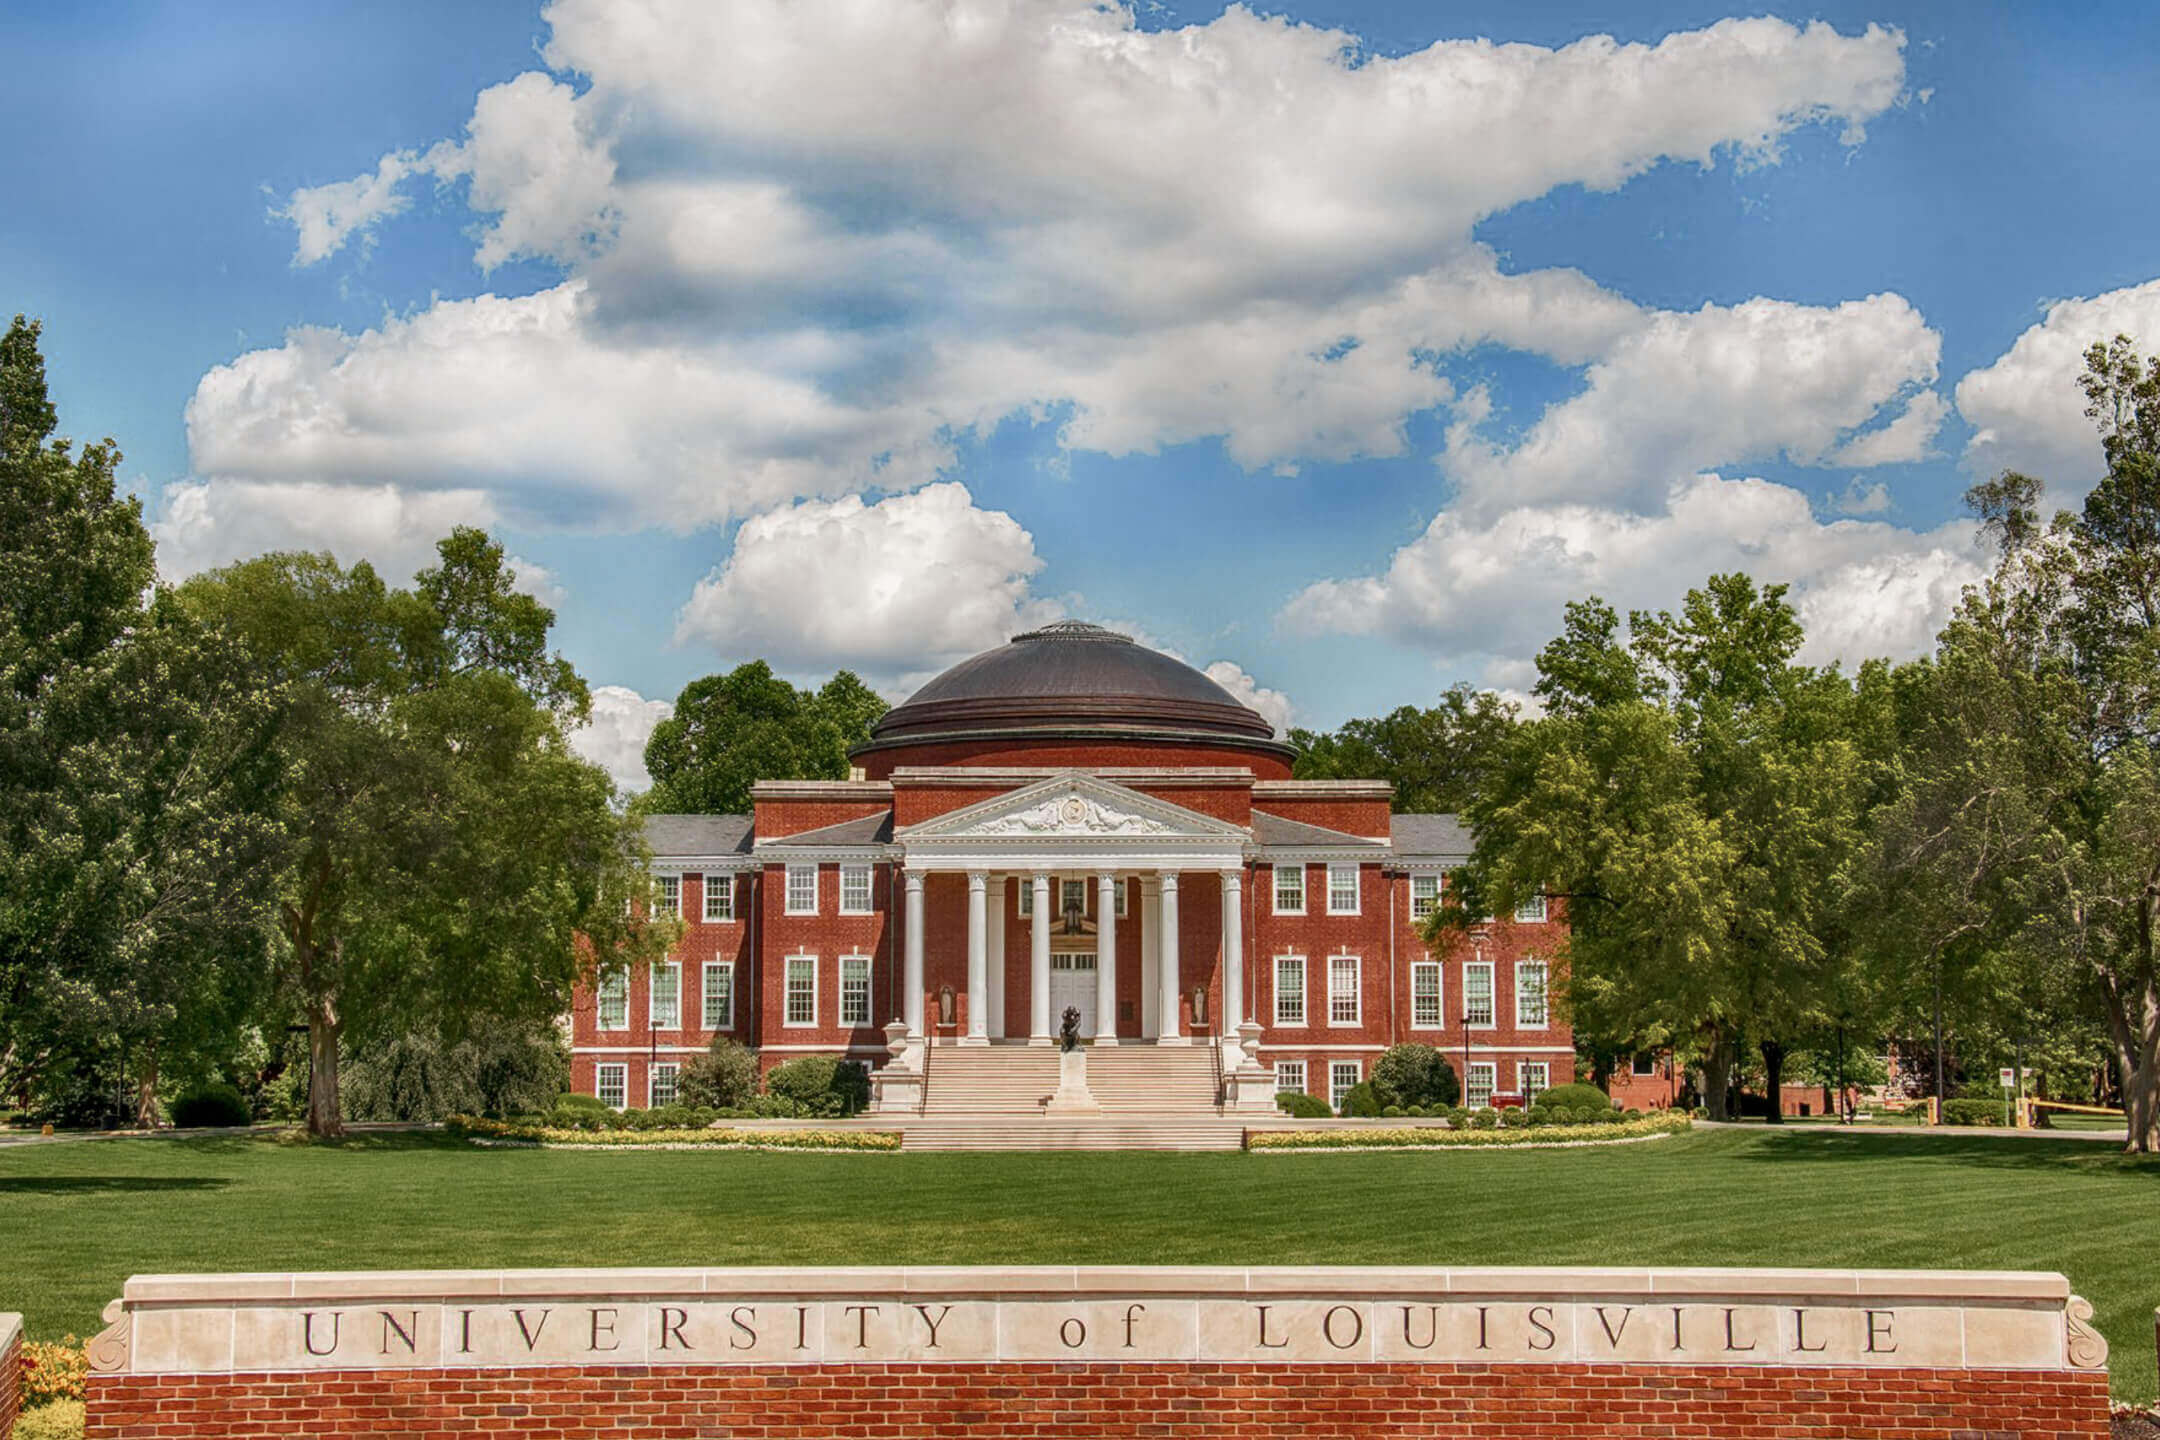 What Is University of Louisville Known For?